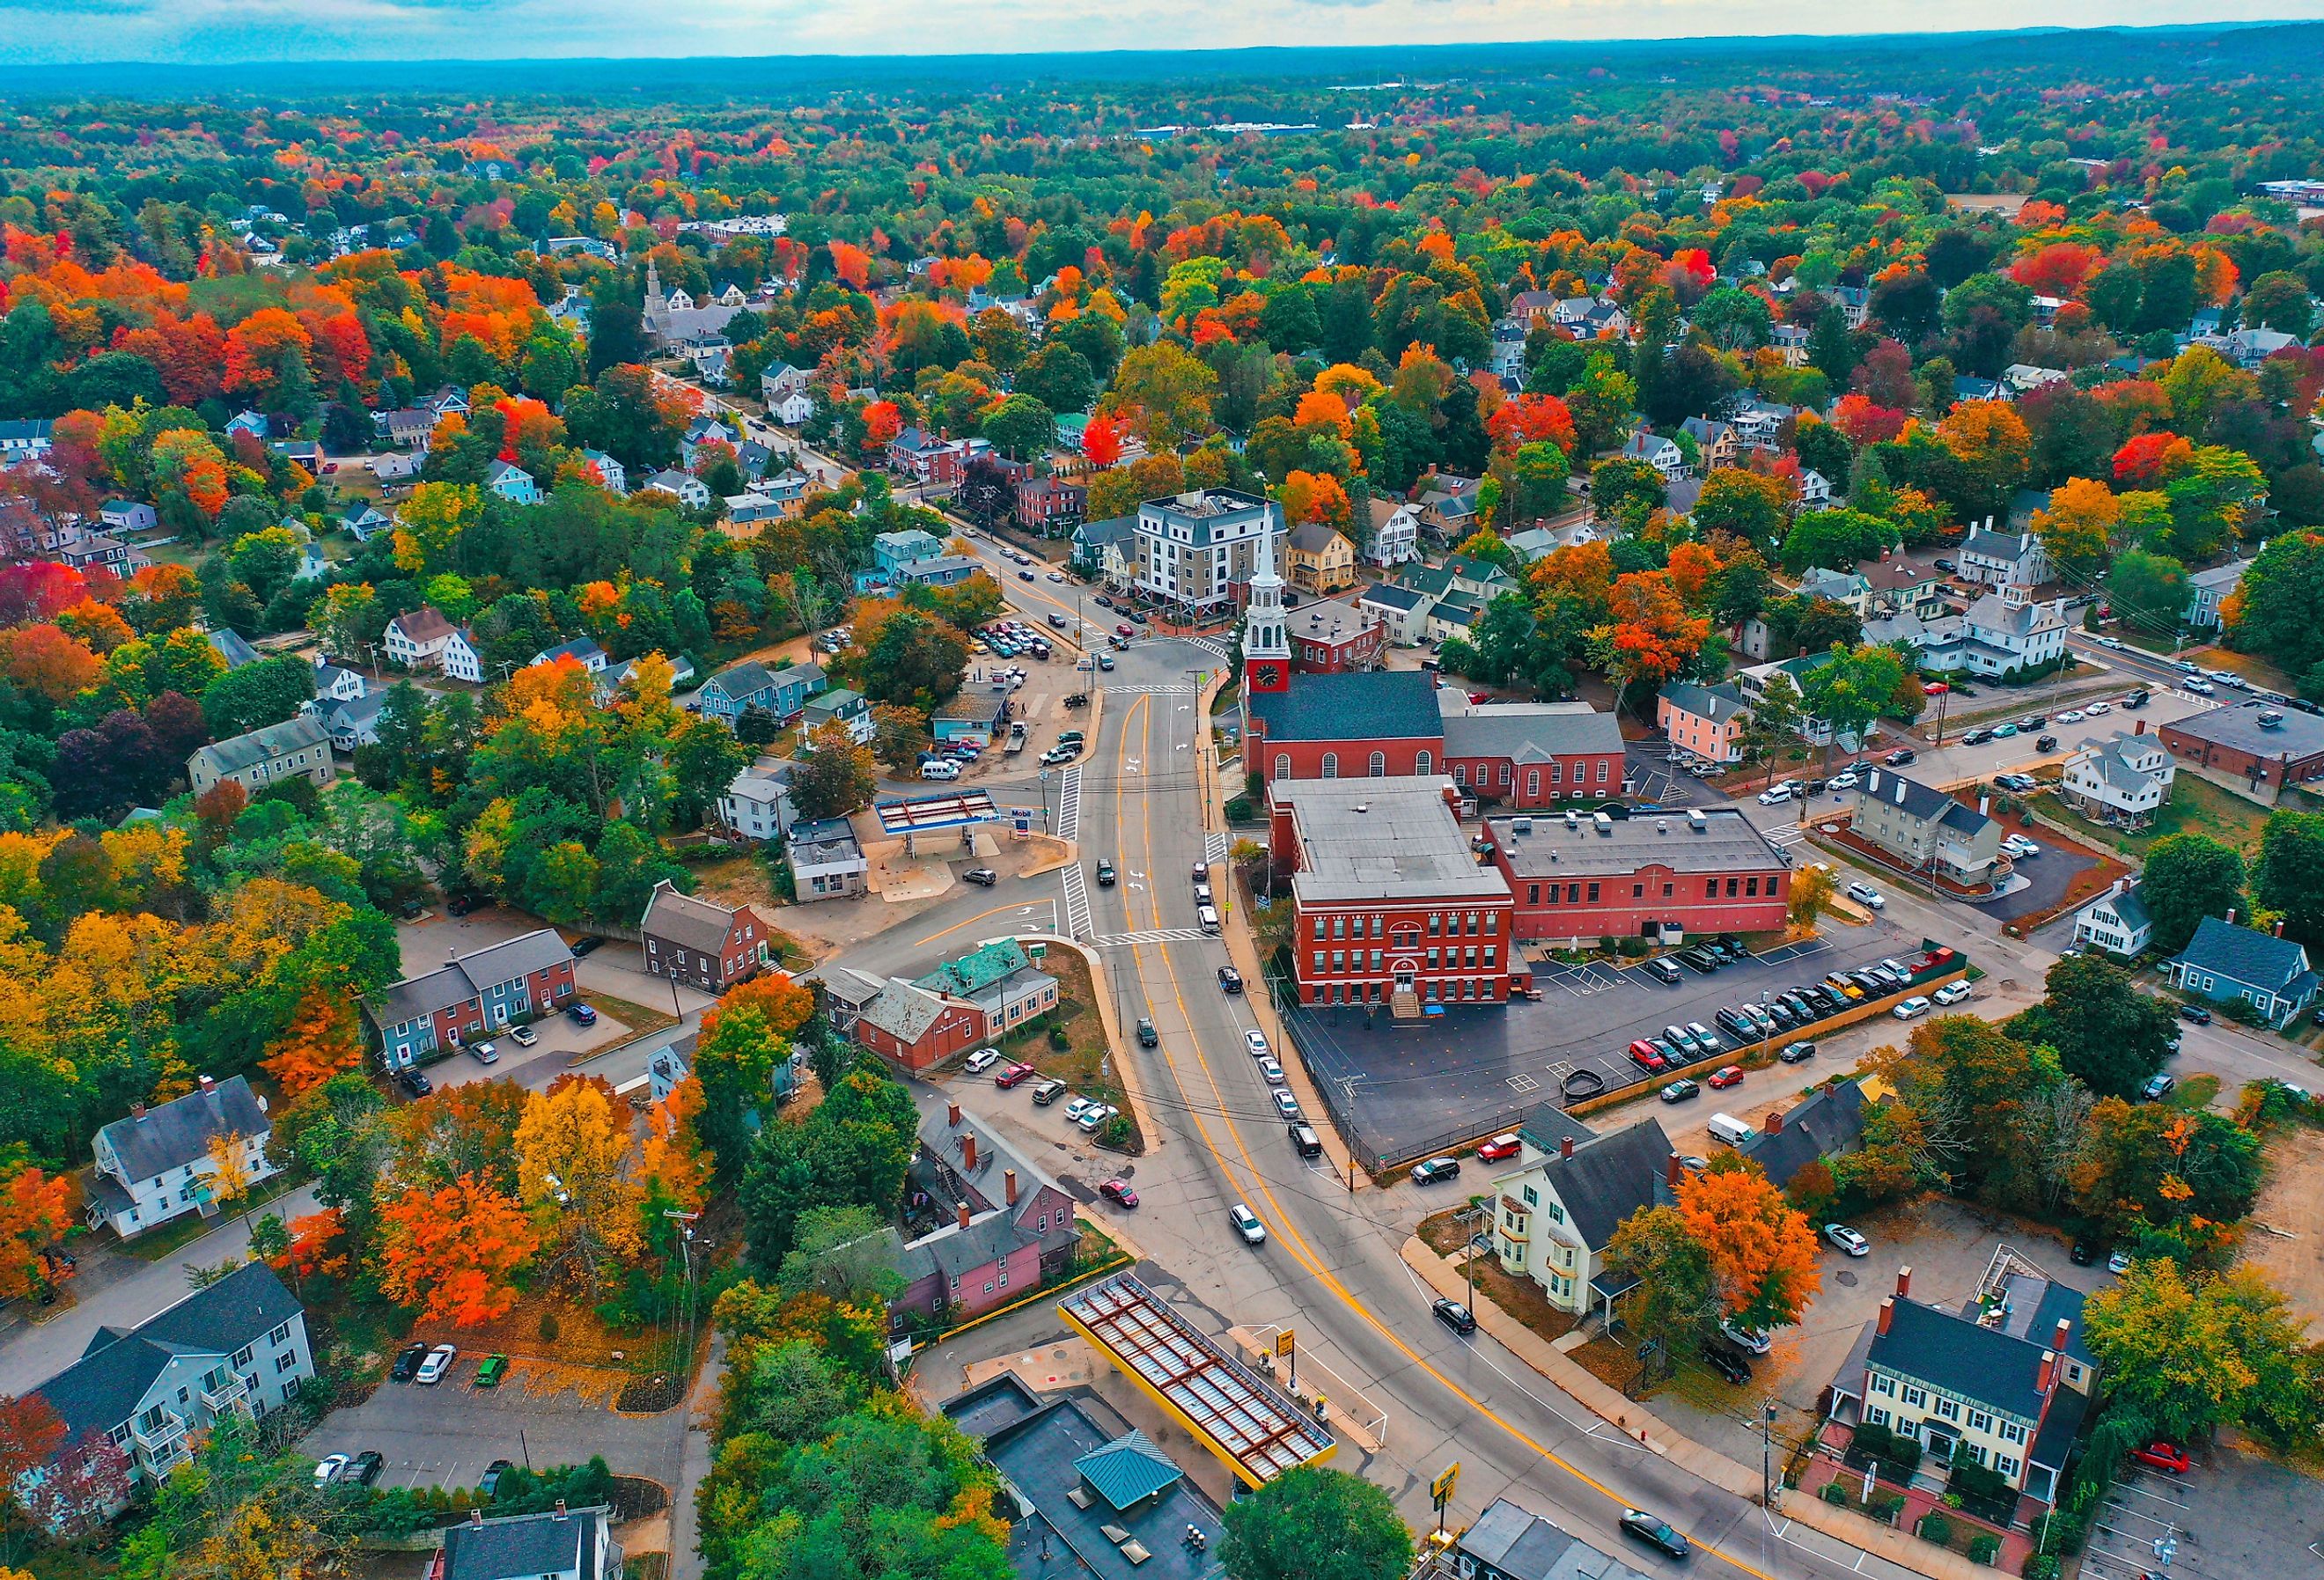 Aerial drone photography of downtown Dover, NH (New Hampshire) during the fall foliage season. Image credit Loud Canvas via Shutterstock.